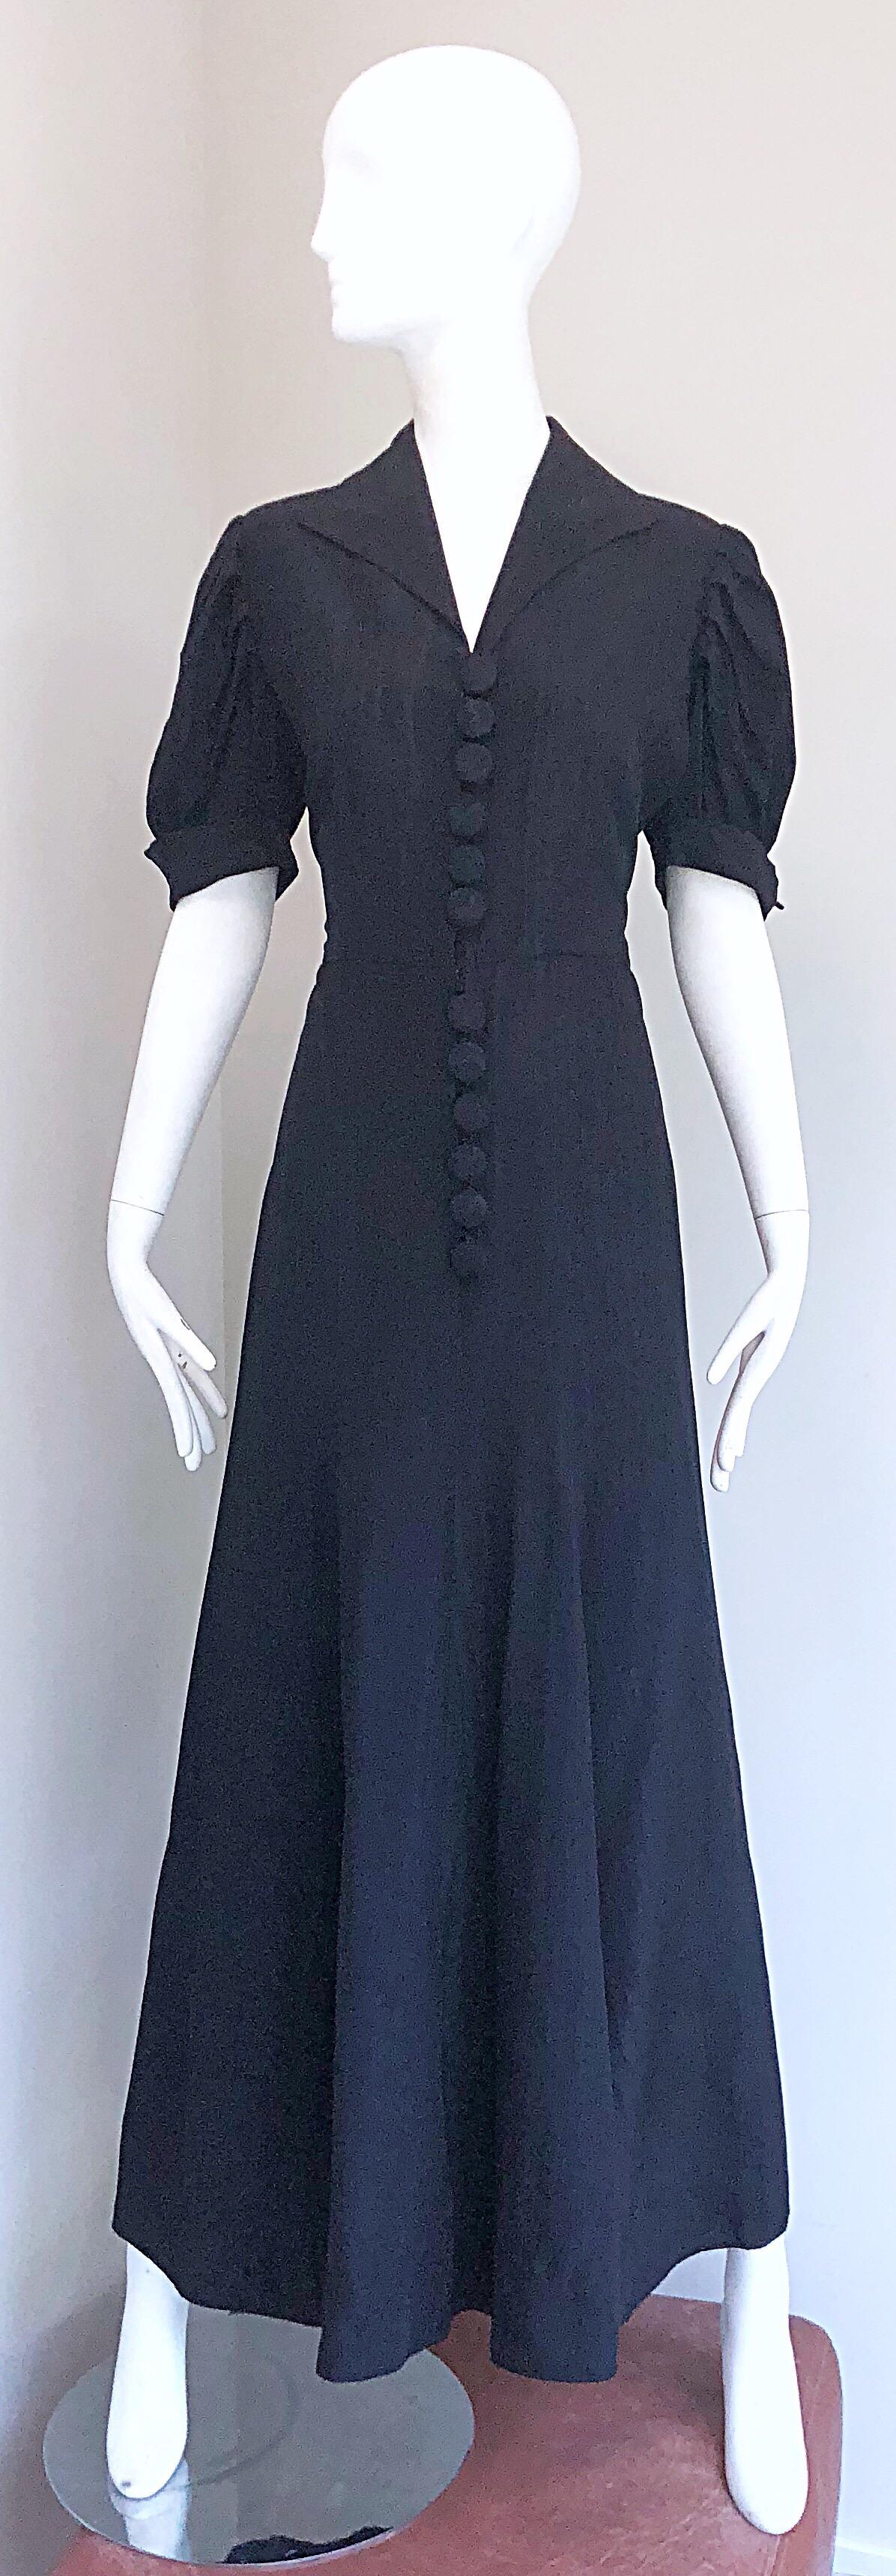 Gorgeous 1940s black silk moire Avant Garde evening gown! Features a luxurious silk moire that gives off just the right amount of sheen. Buttons up the front with the same silk moire fabric covering the buttons. Hidden hook-and-eye closure at inner